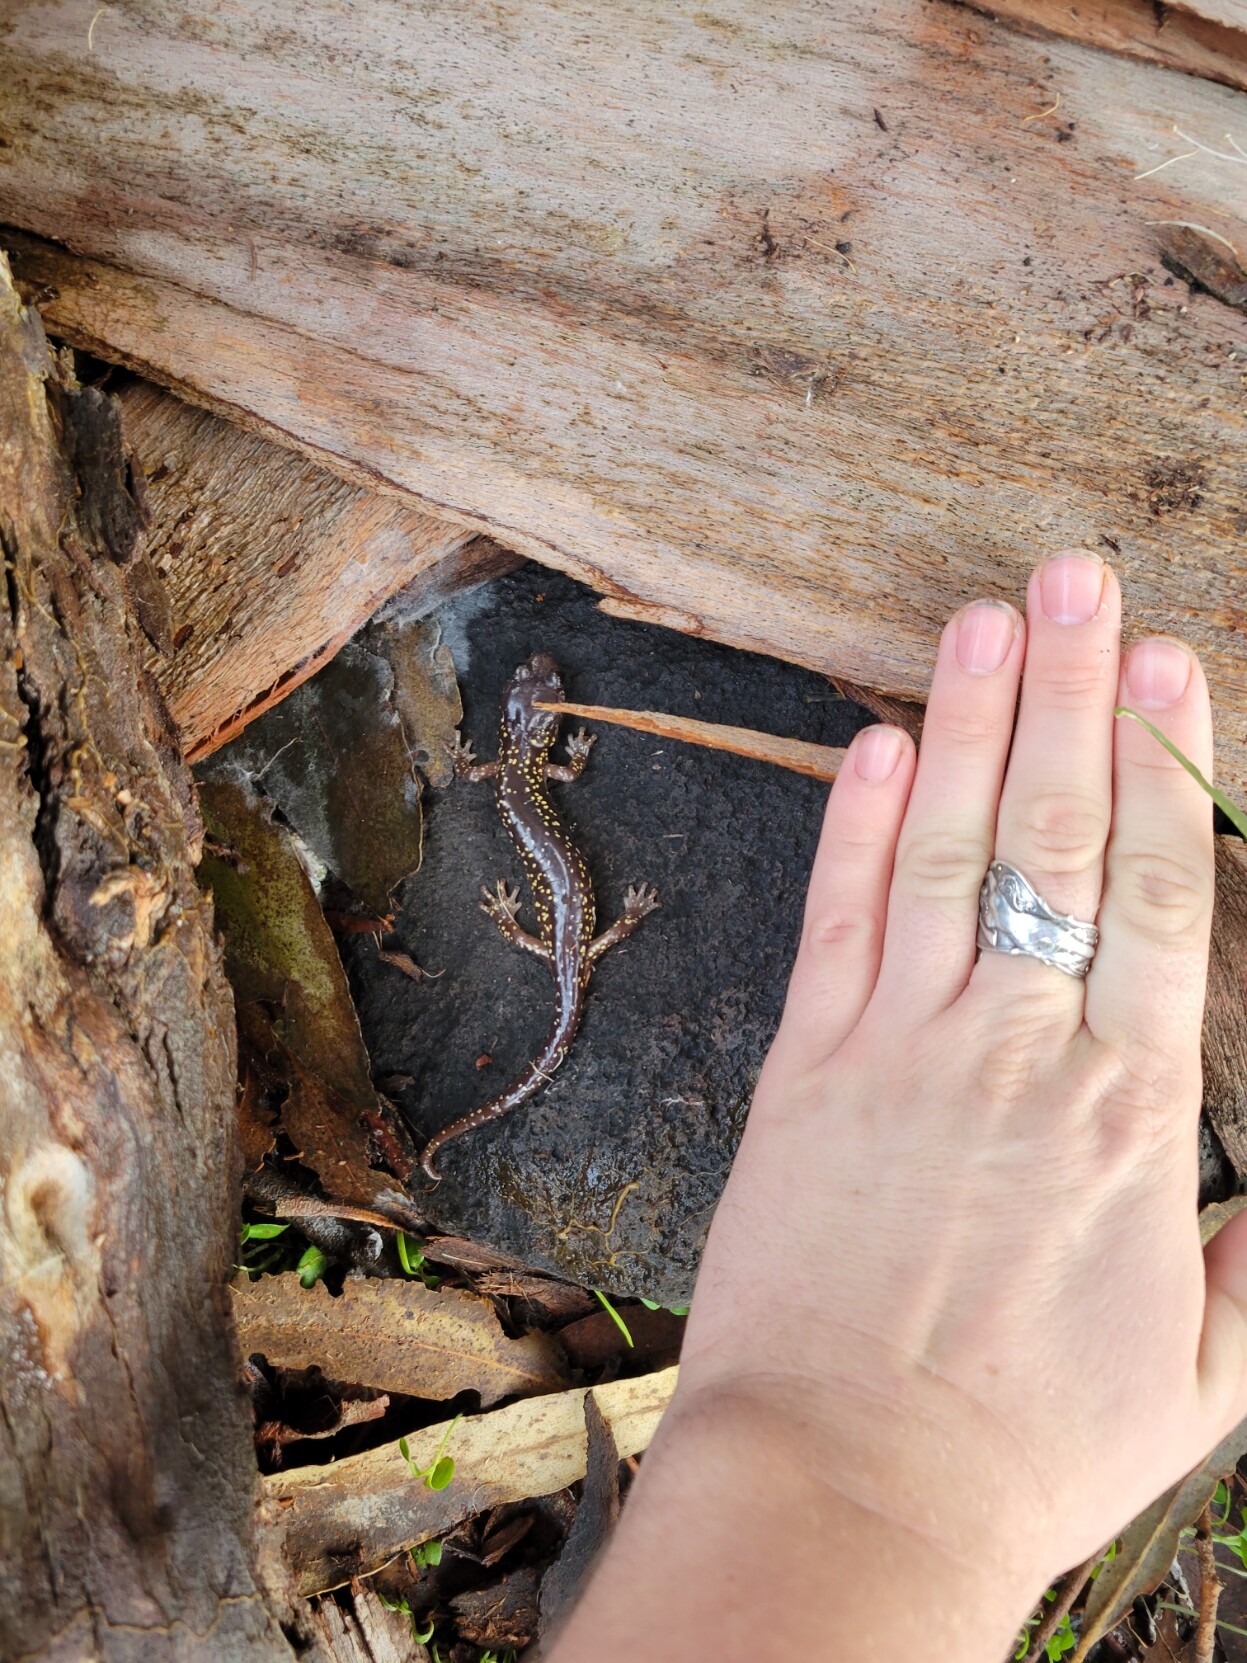 A large brown salamander with gold spots in the leaf litter, a hand for scale. It is nearly as long as the hand.